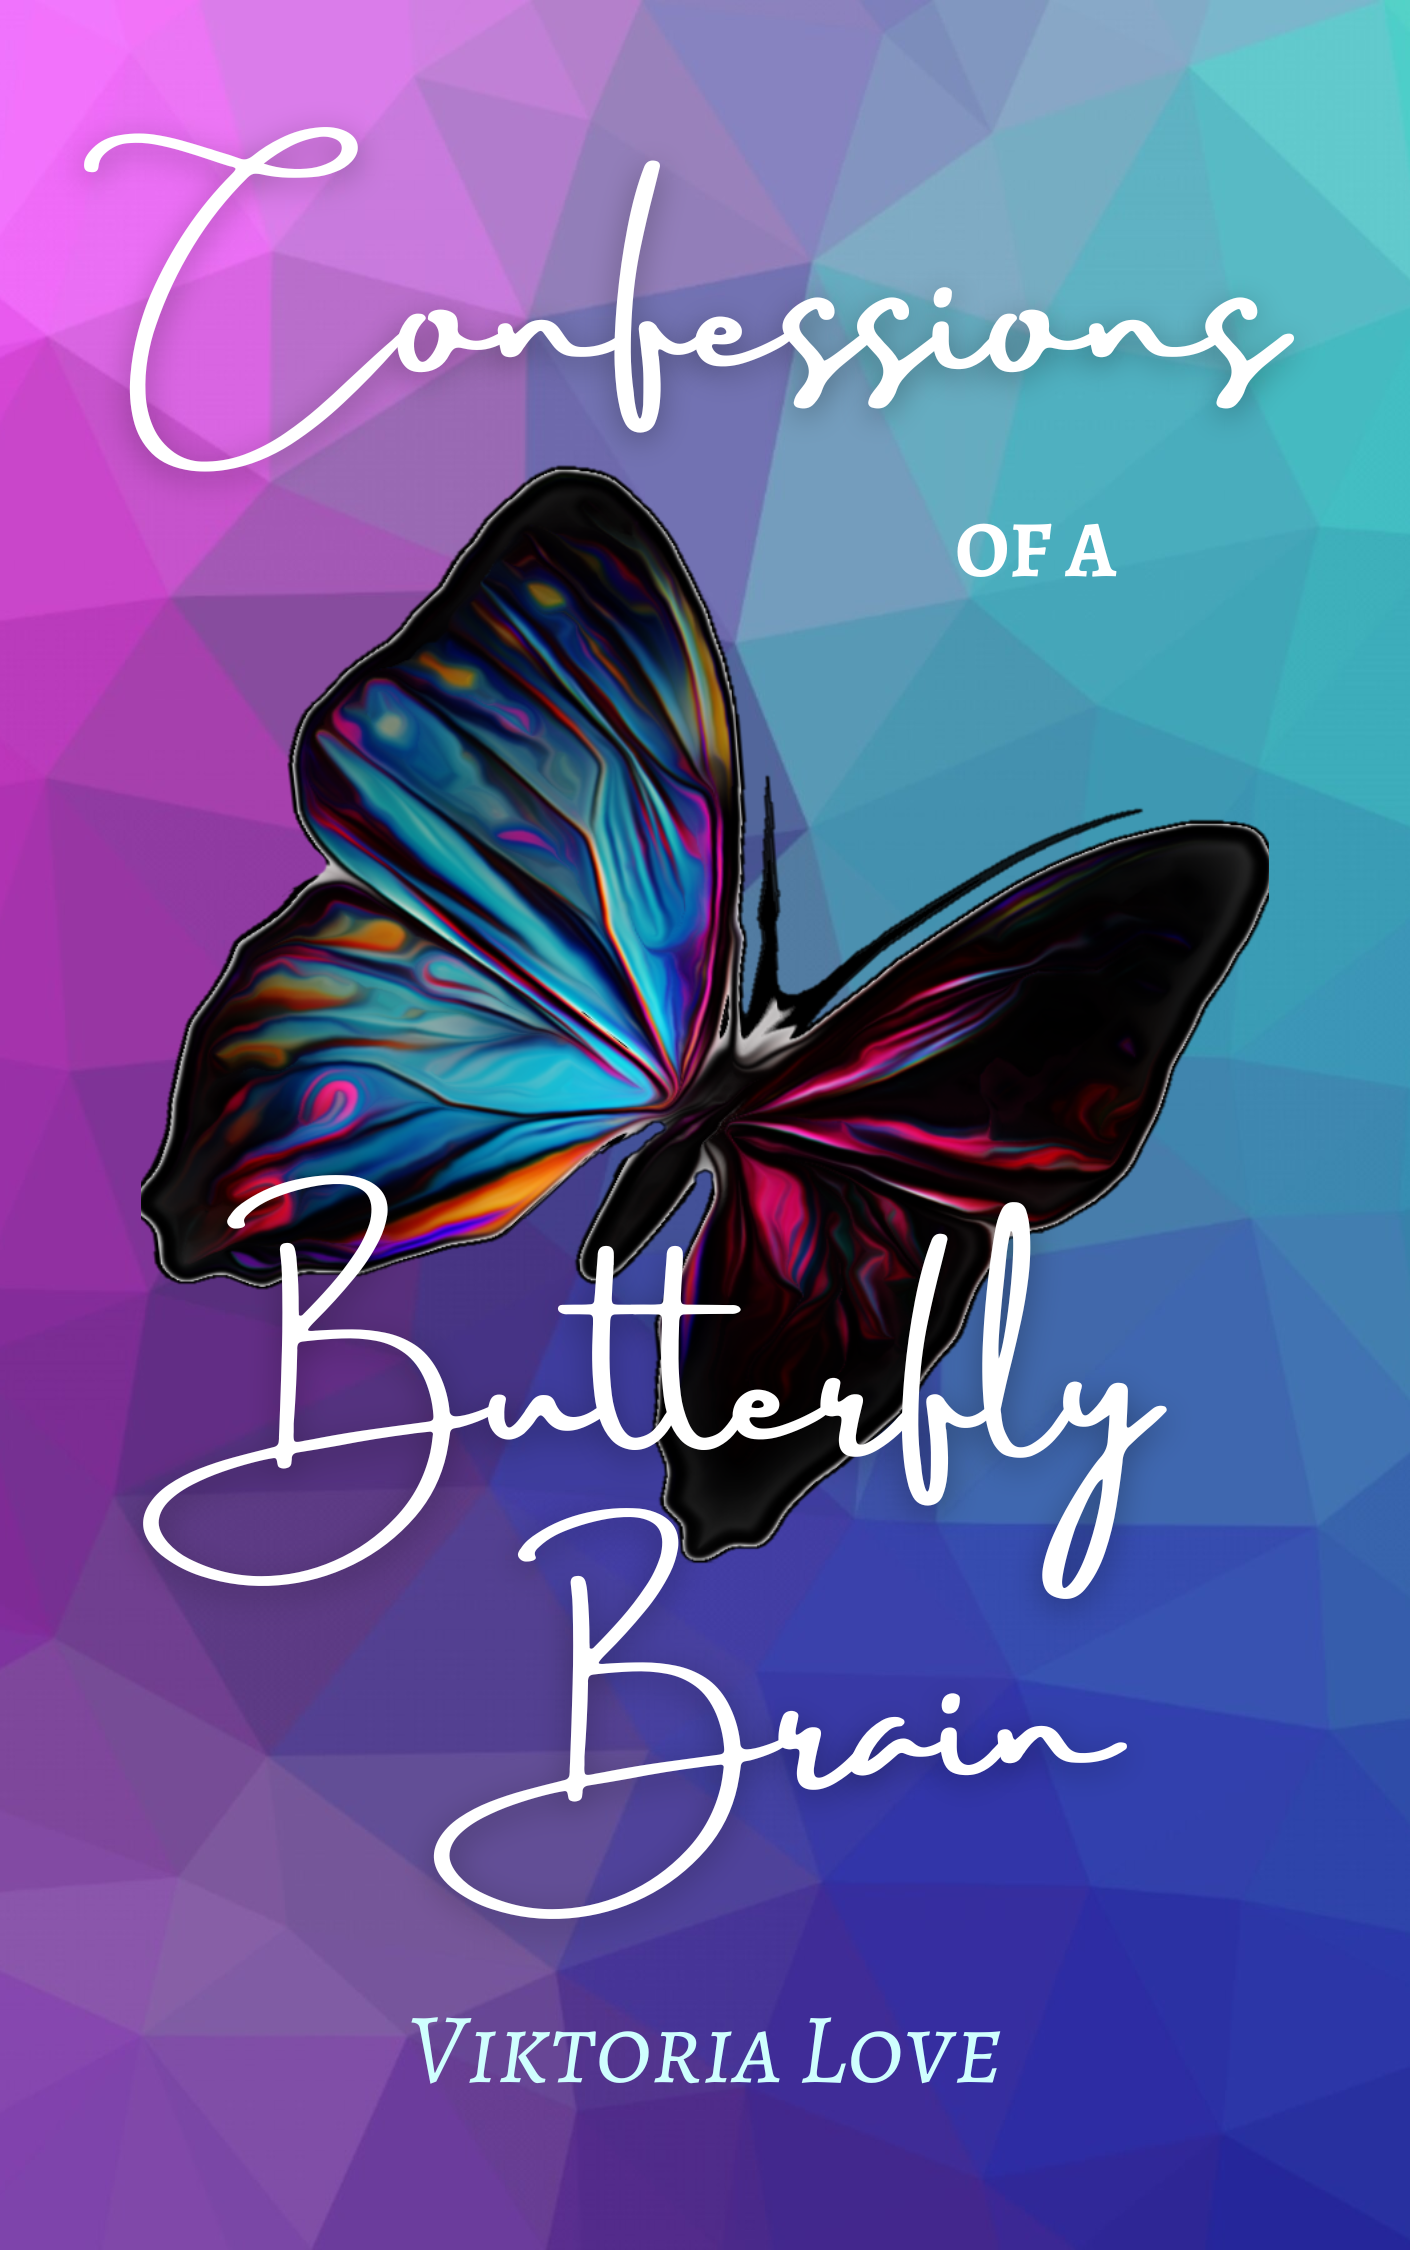 Confessions of a Butterfly Brain's Book Image